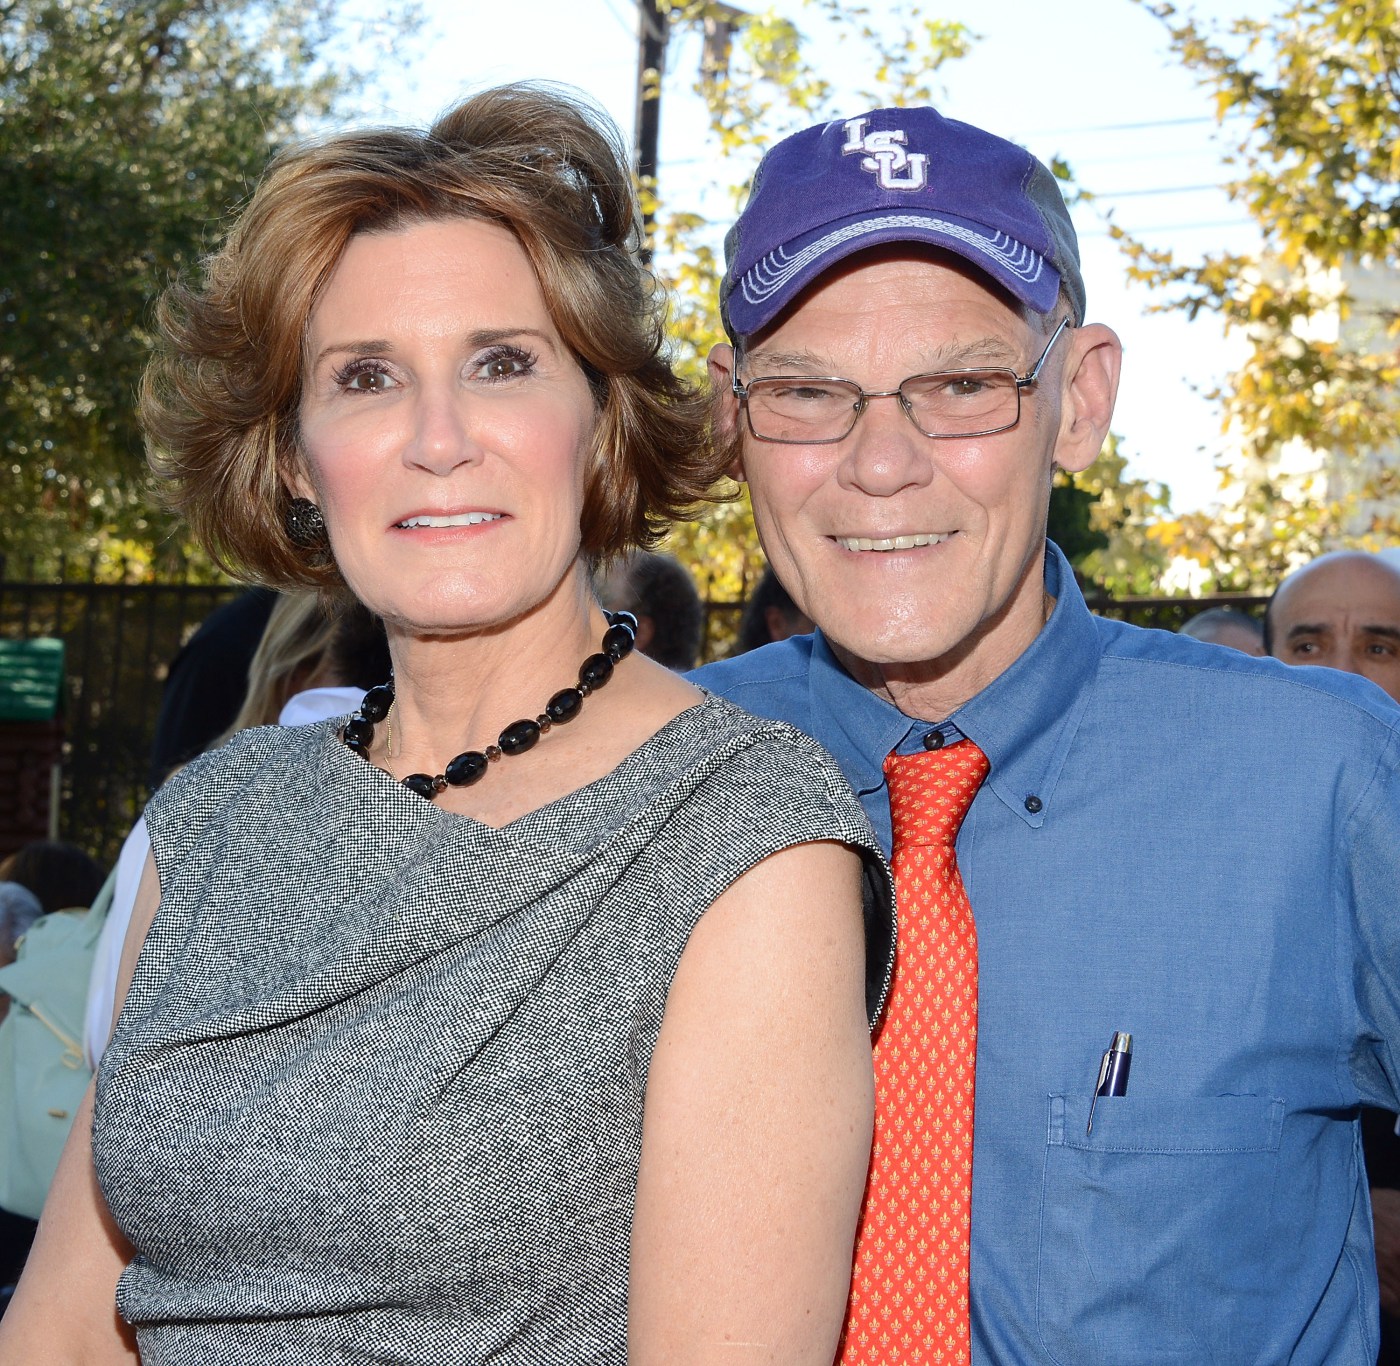 James Carville and Mary Matalin